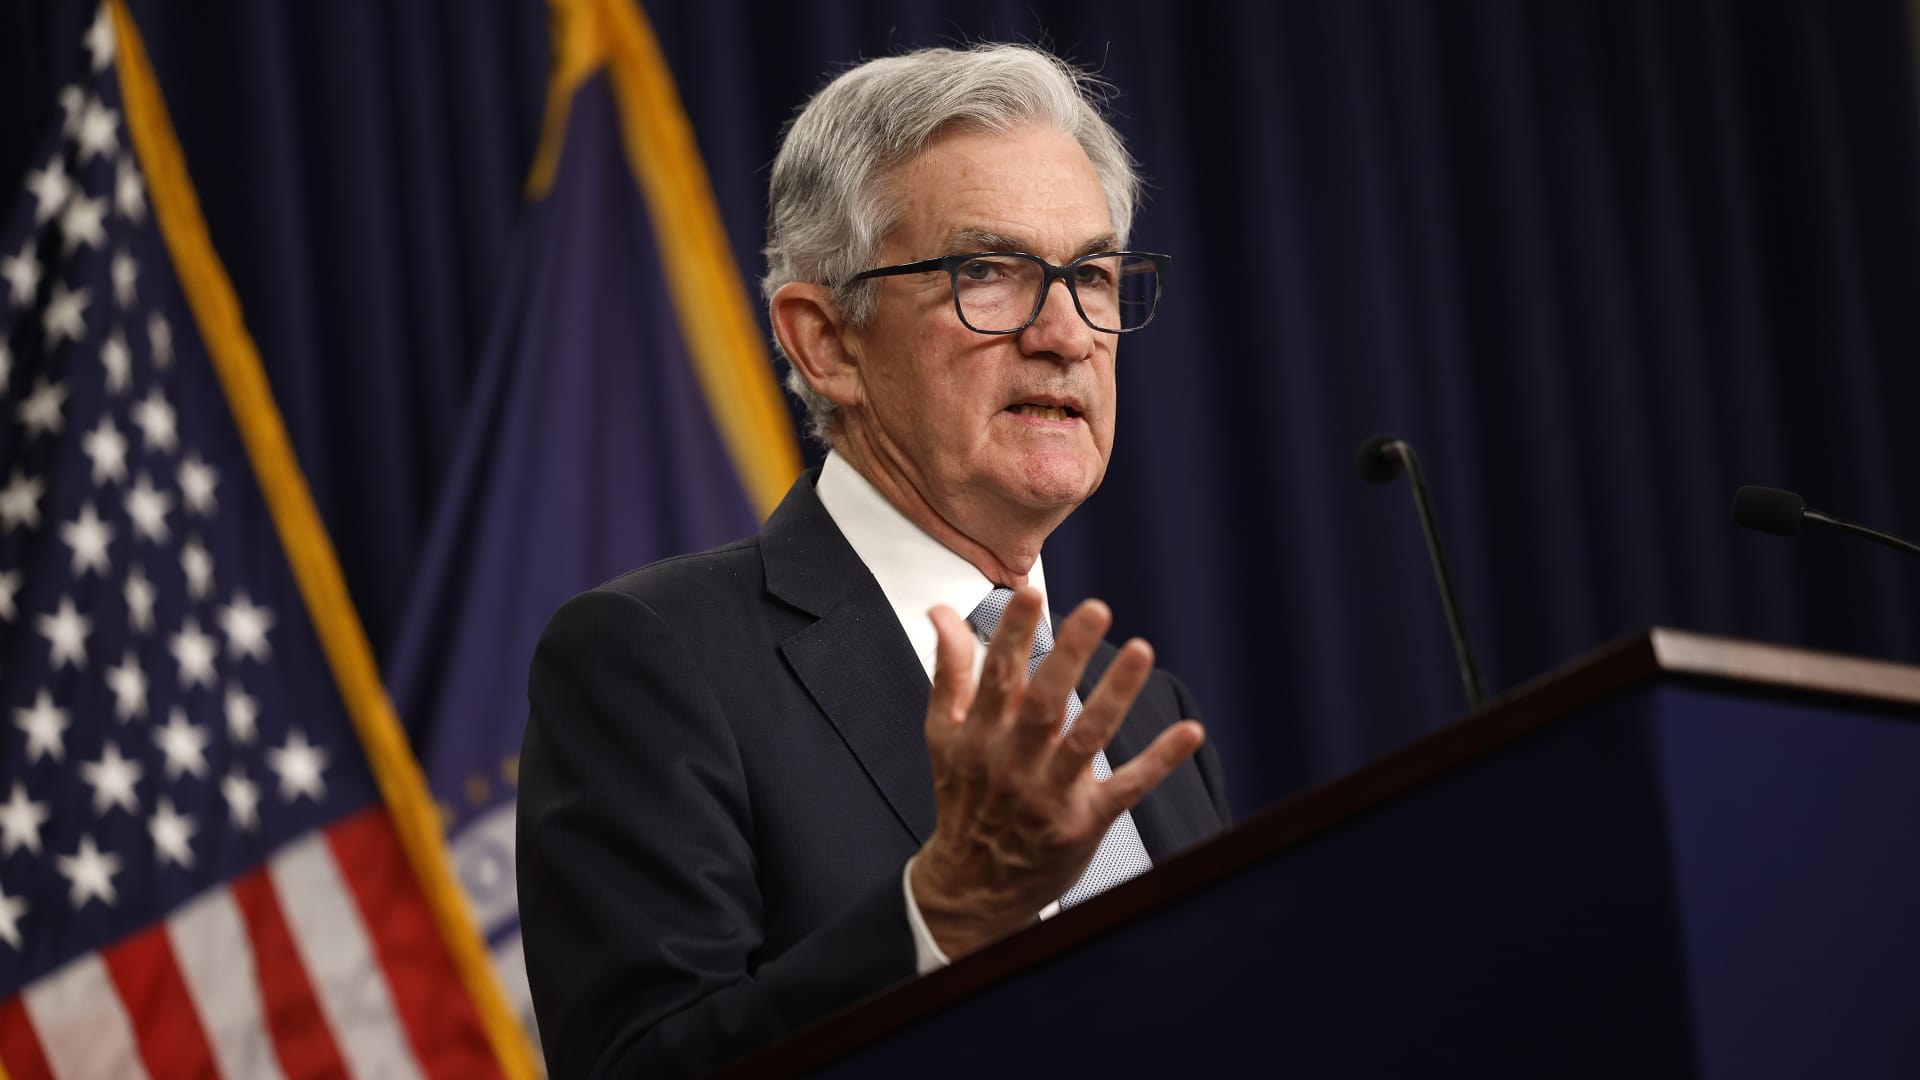 Fed raises interest rates half a point to highest level in 15 years